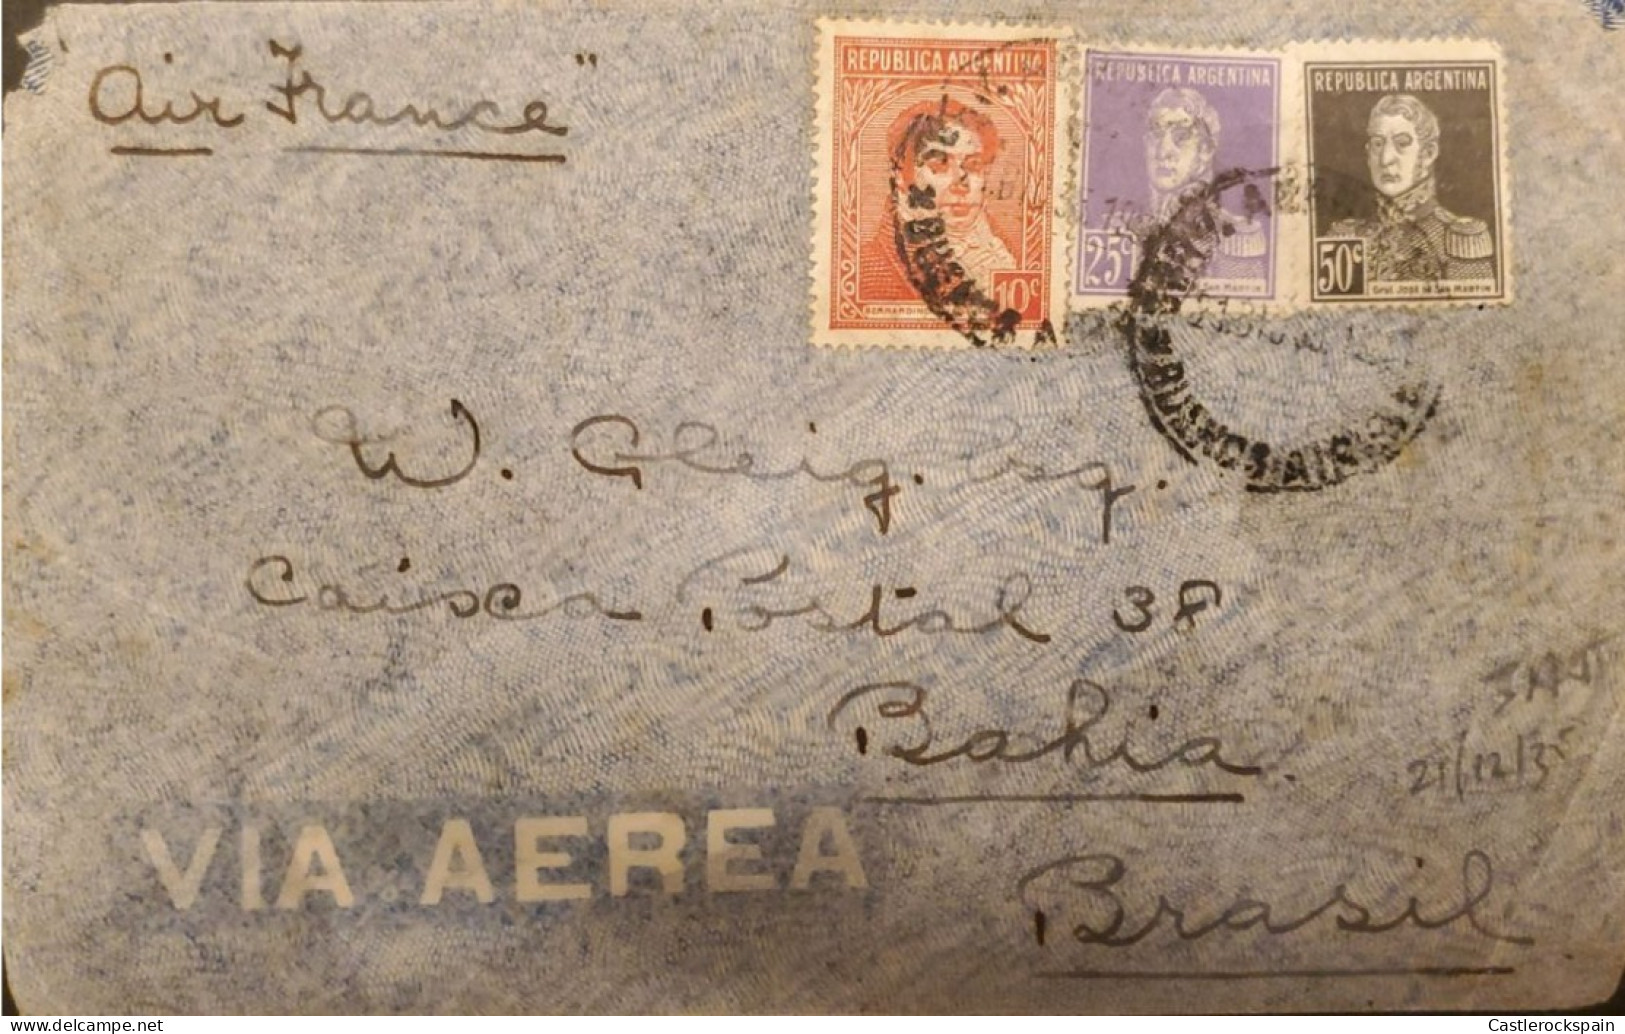 MI) 1935, ARGENTINA, AIR FRANCE, FROM BUENOS AIRES TO BAHIA - BRAZIL, AIR MAIL, GRAL SAN MARTIN AND RIVADAVIA STAMPS - Gebruikt